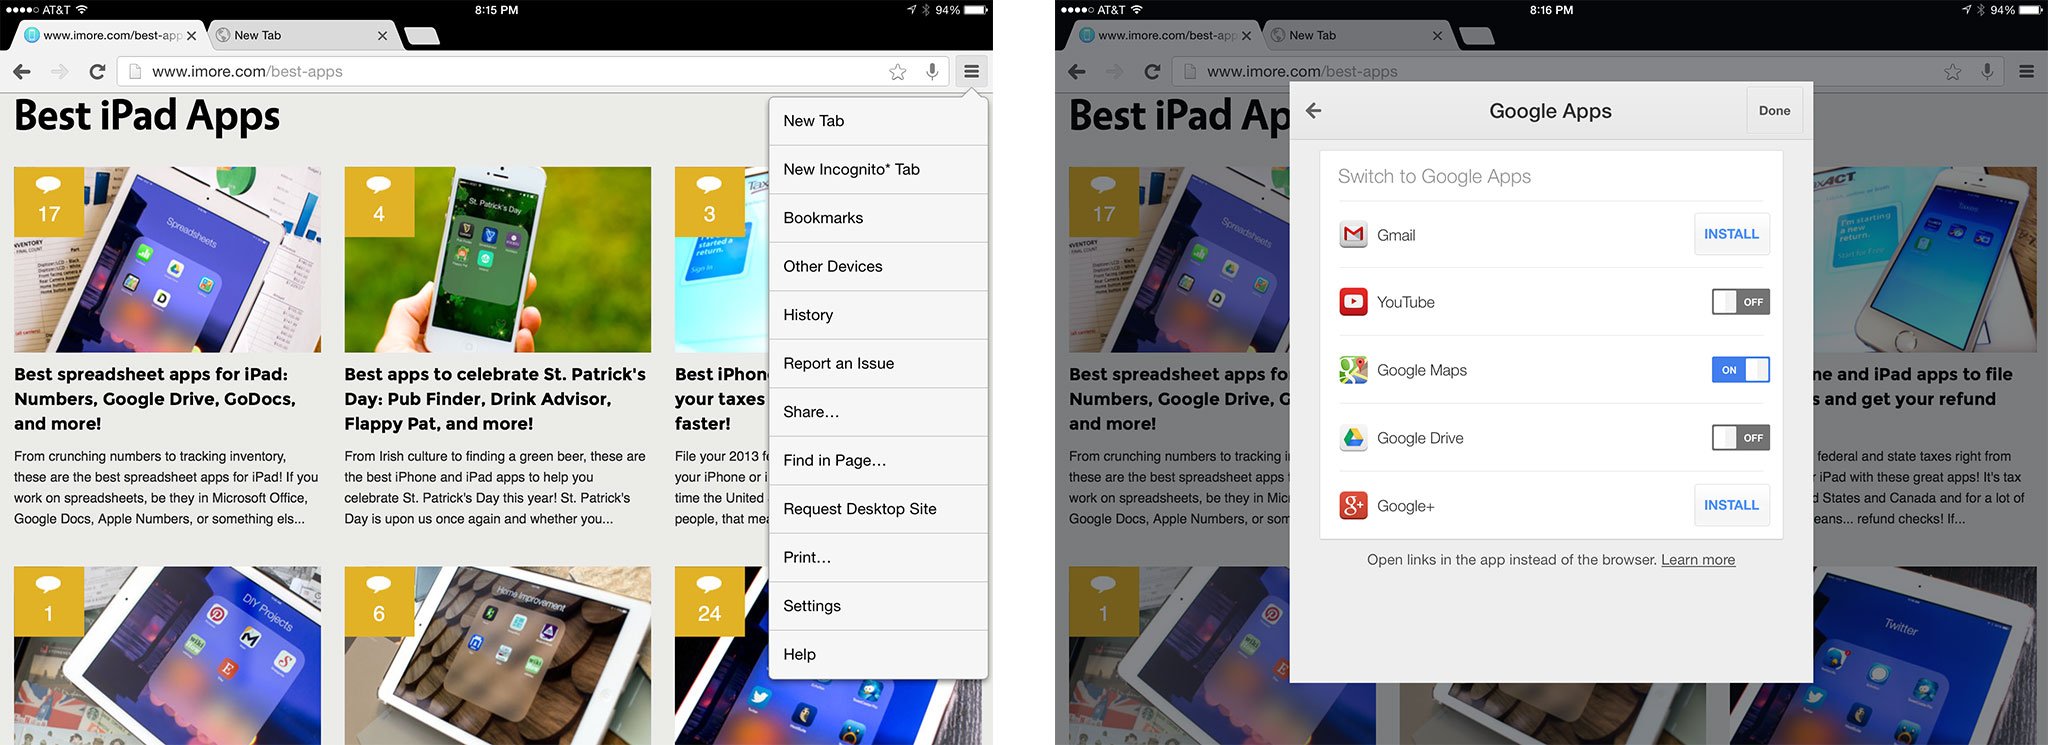 Best alternative web browsers for iPad: Chrome